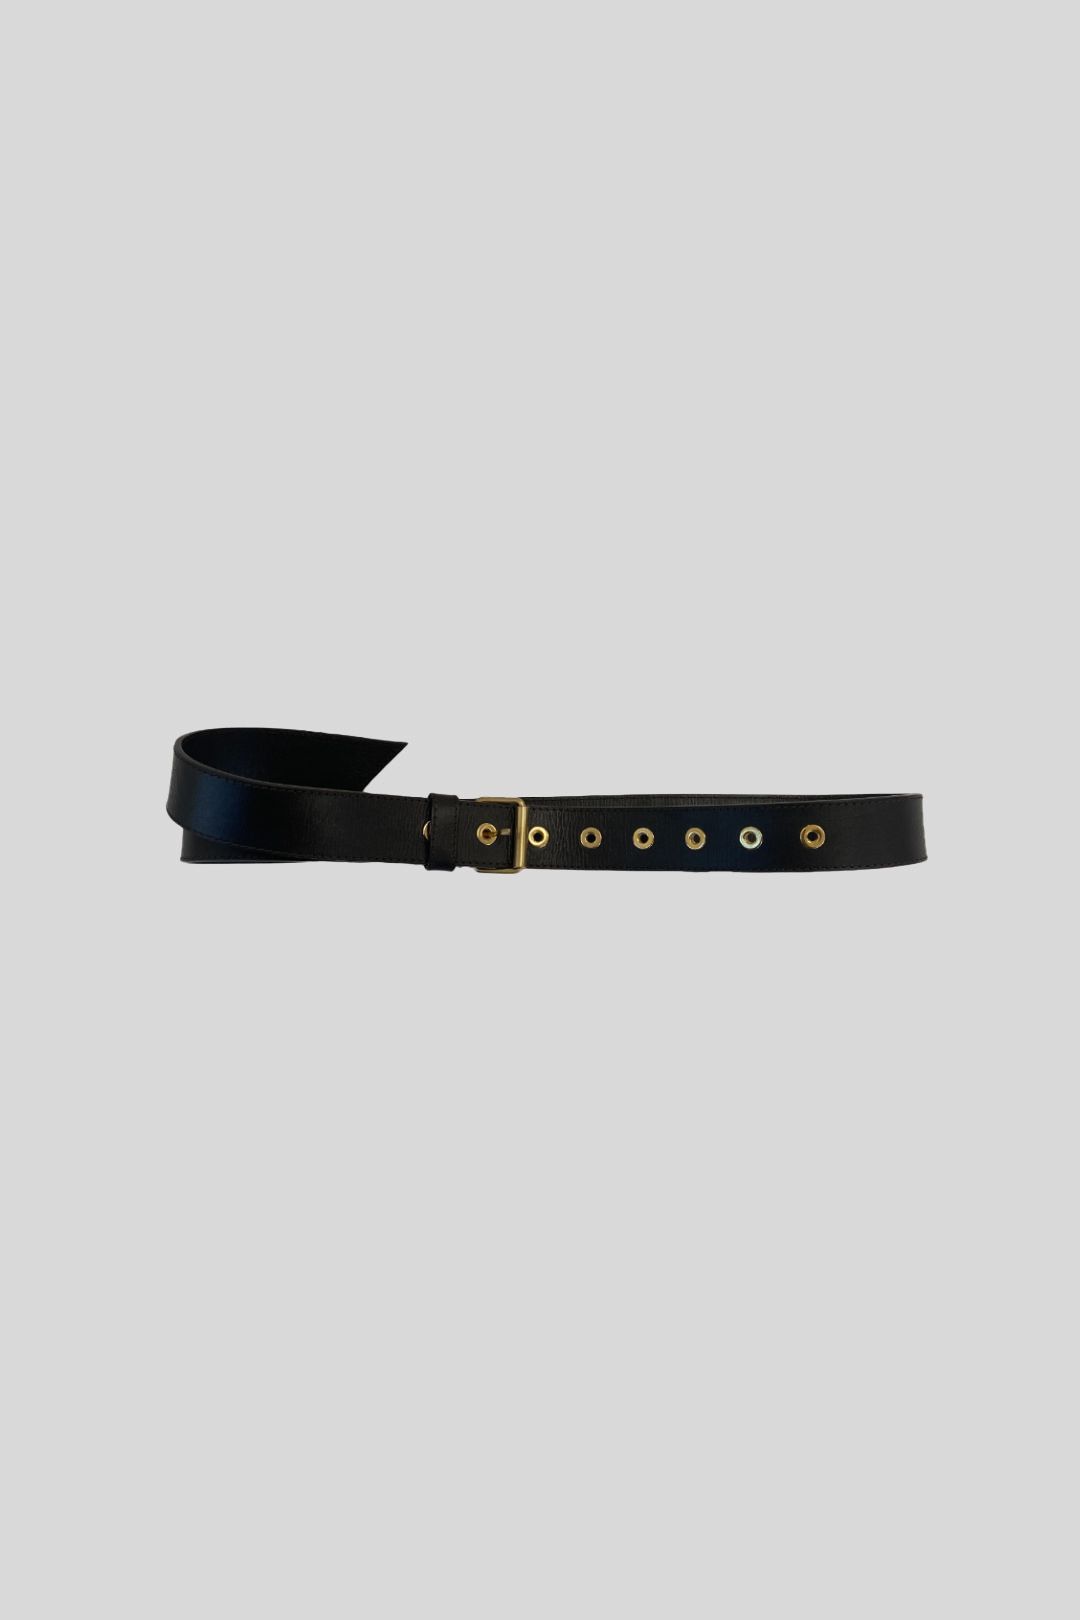 Scanlan Theodore Brown Leather Belt with Gold tone Grommets